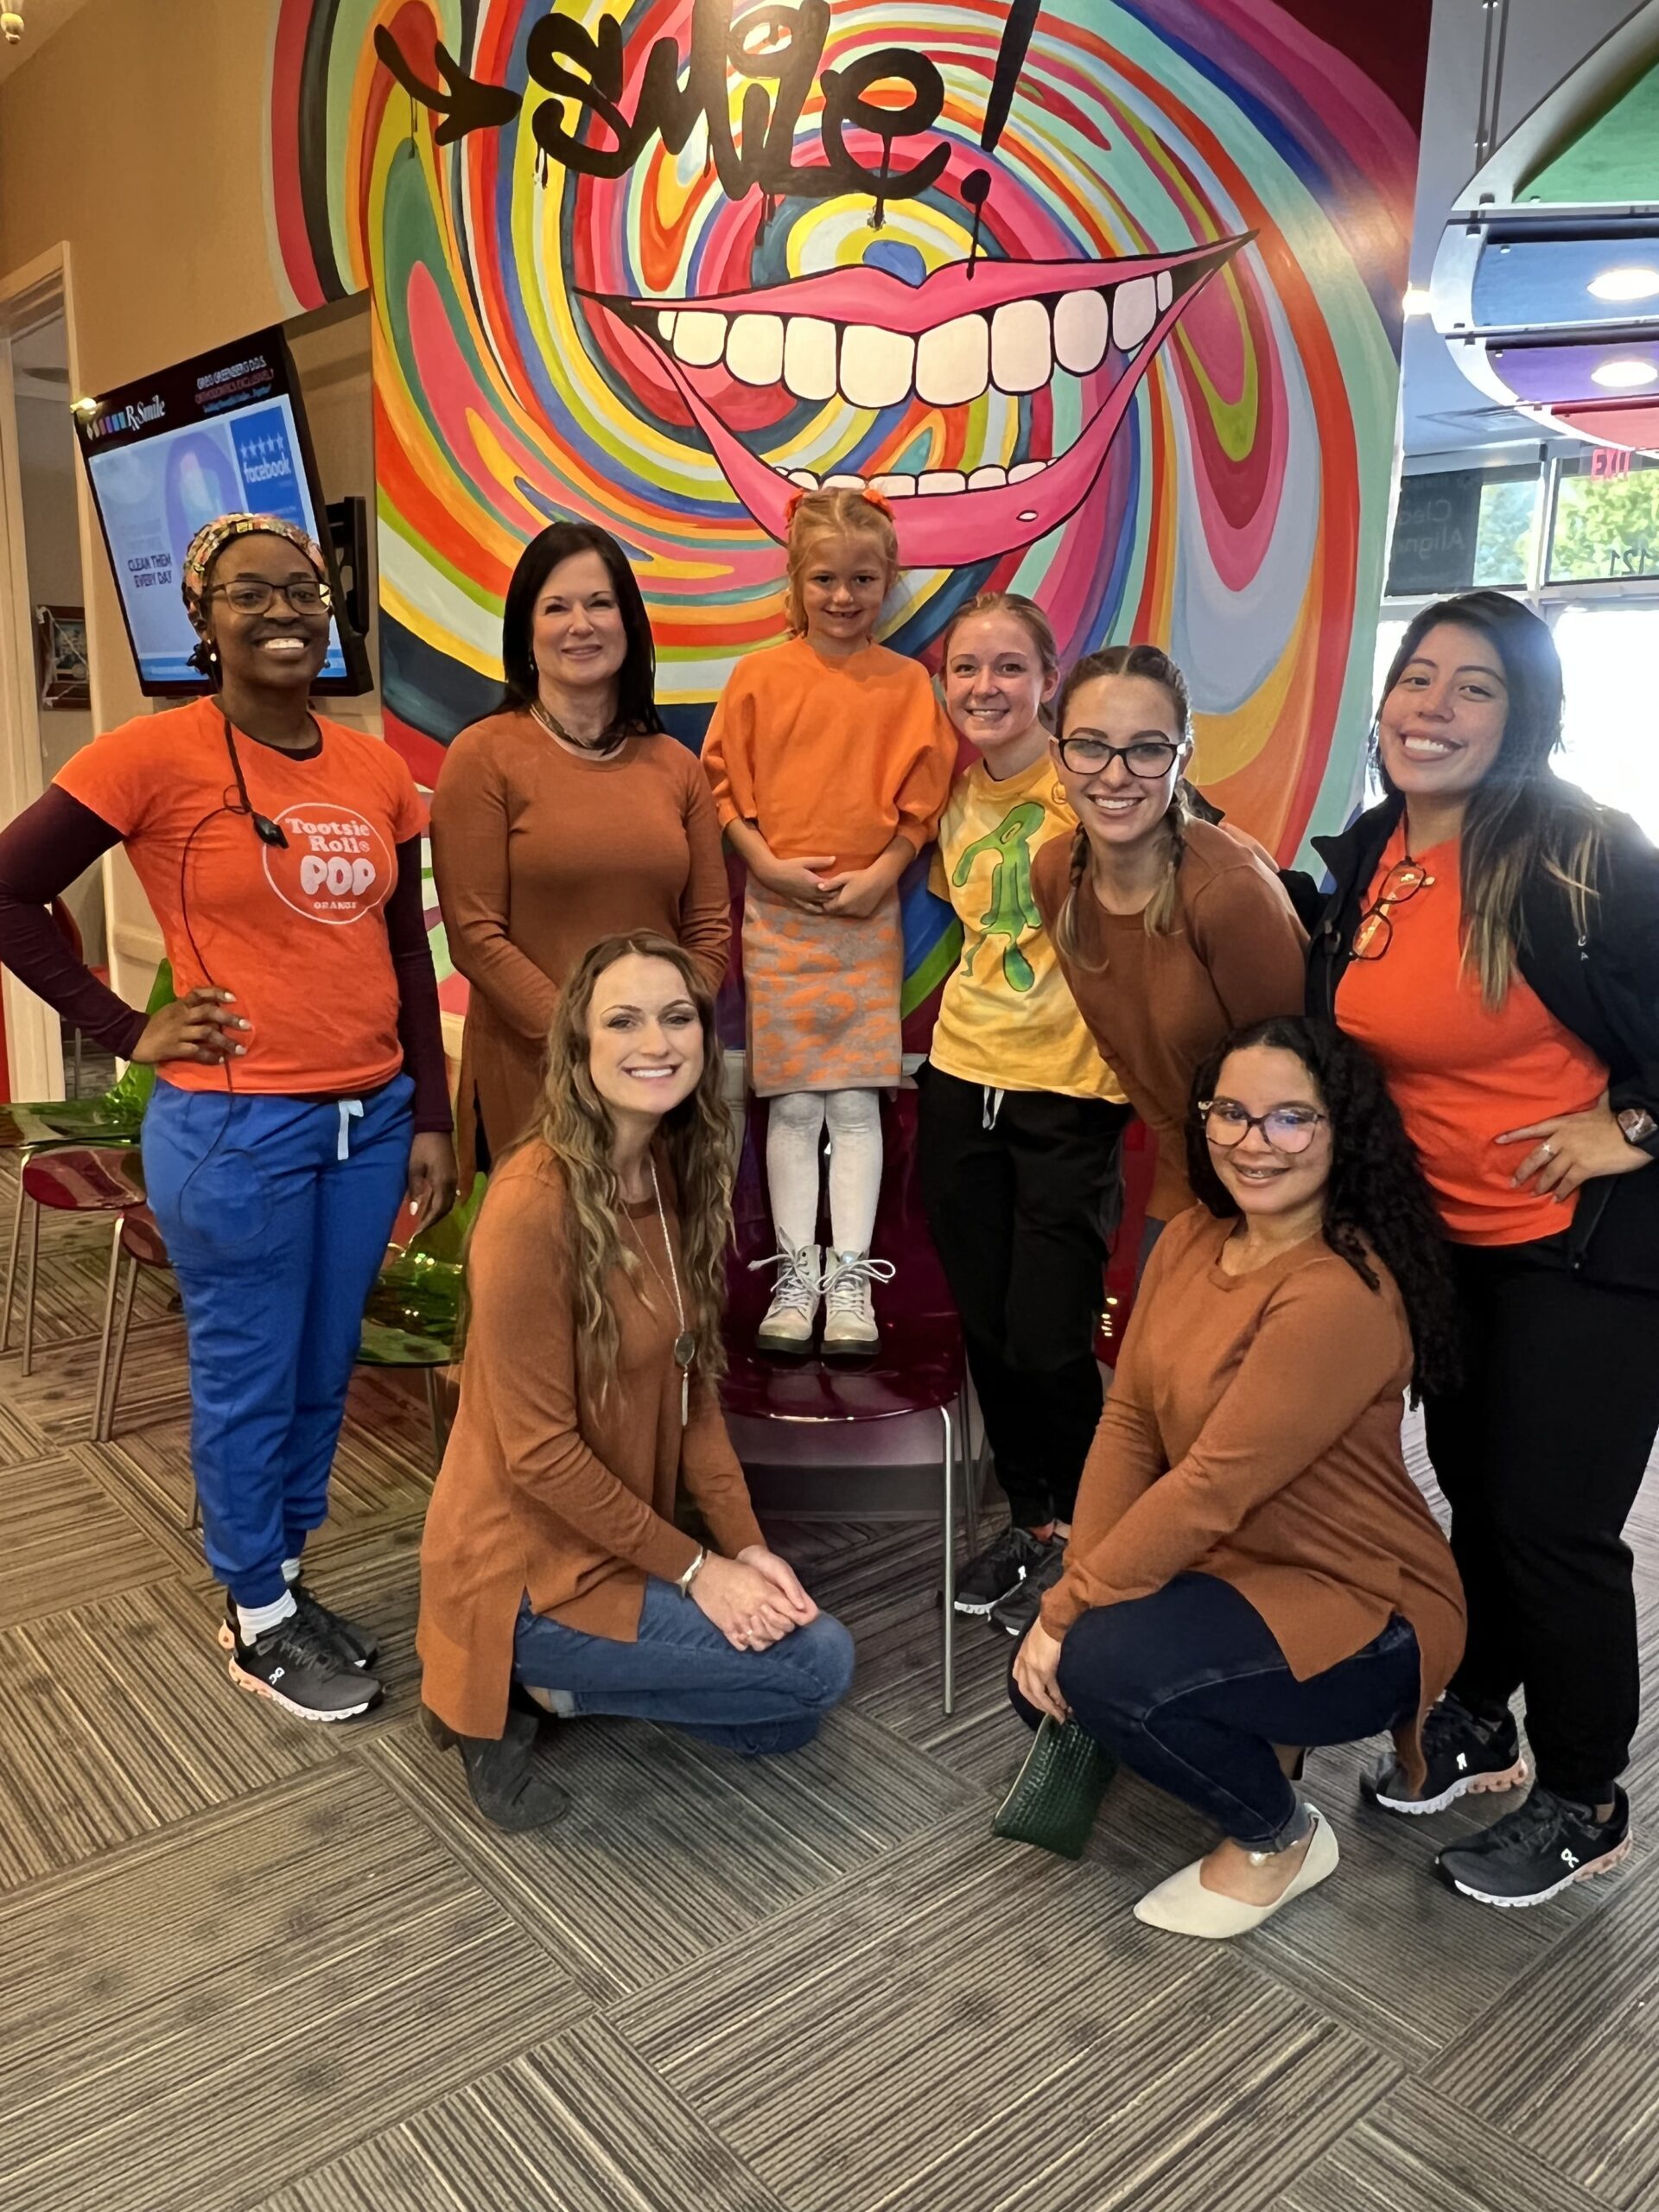 RxSmile team takes a stand against bullying